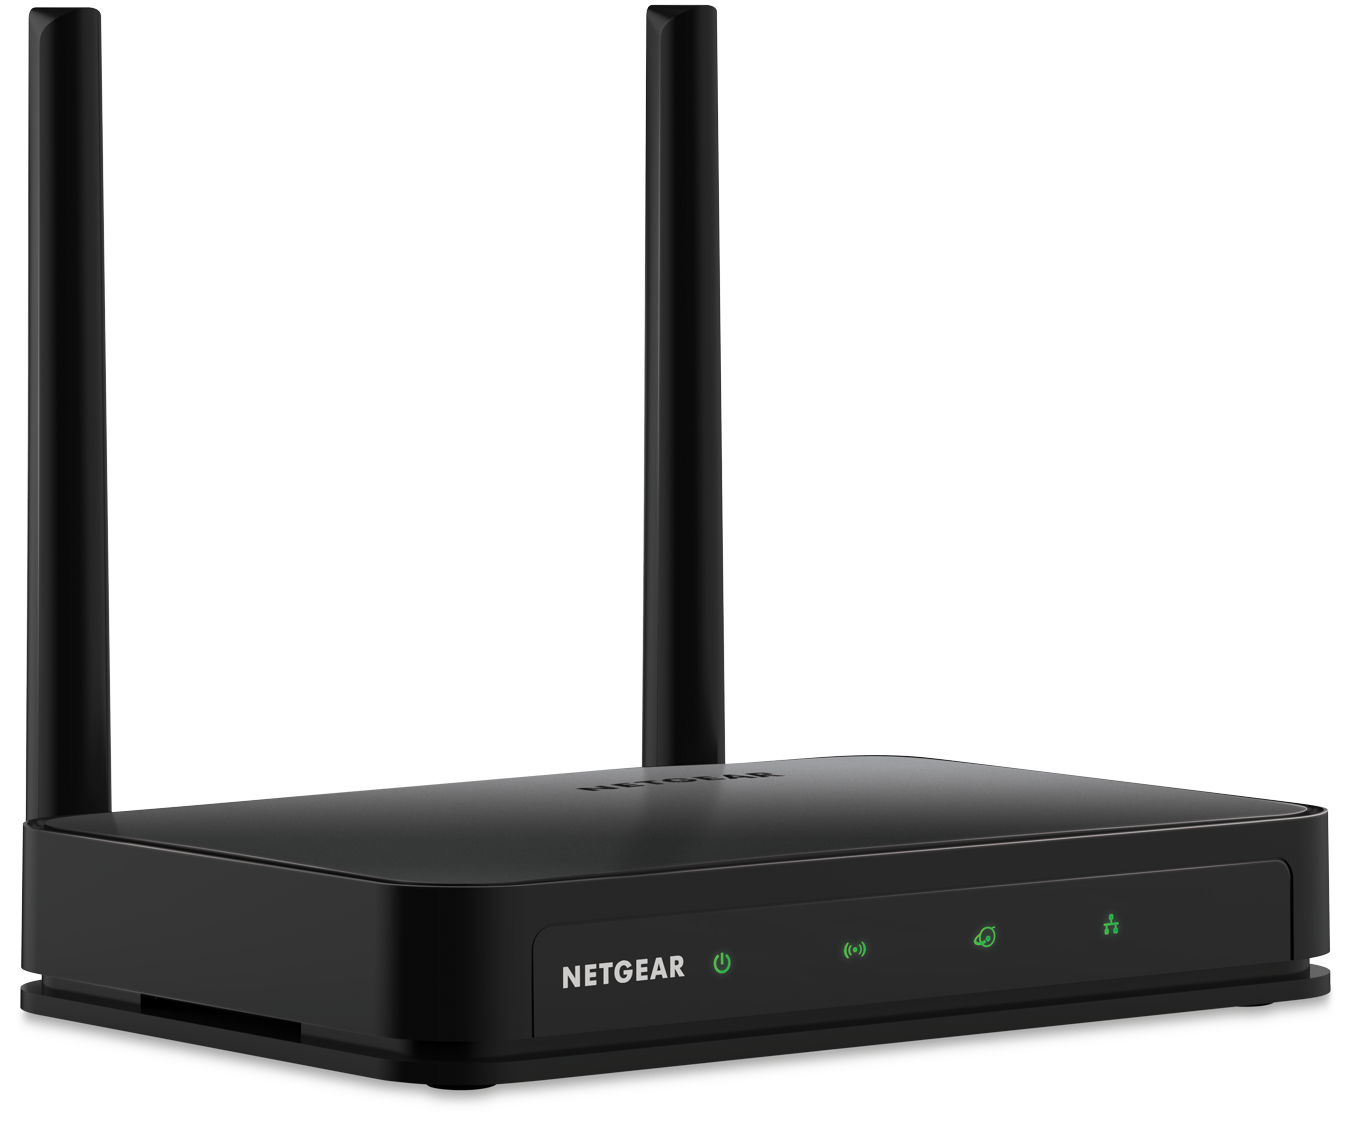 NETGEAR - AC750 WiFi Router, 750Mbps (R6020) - image 1 of 7